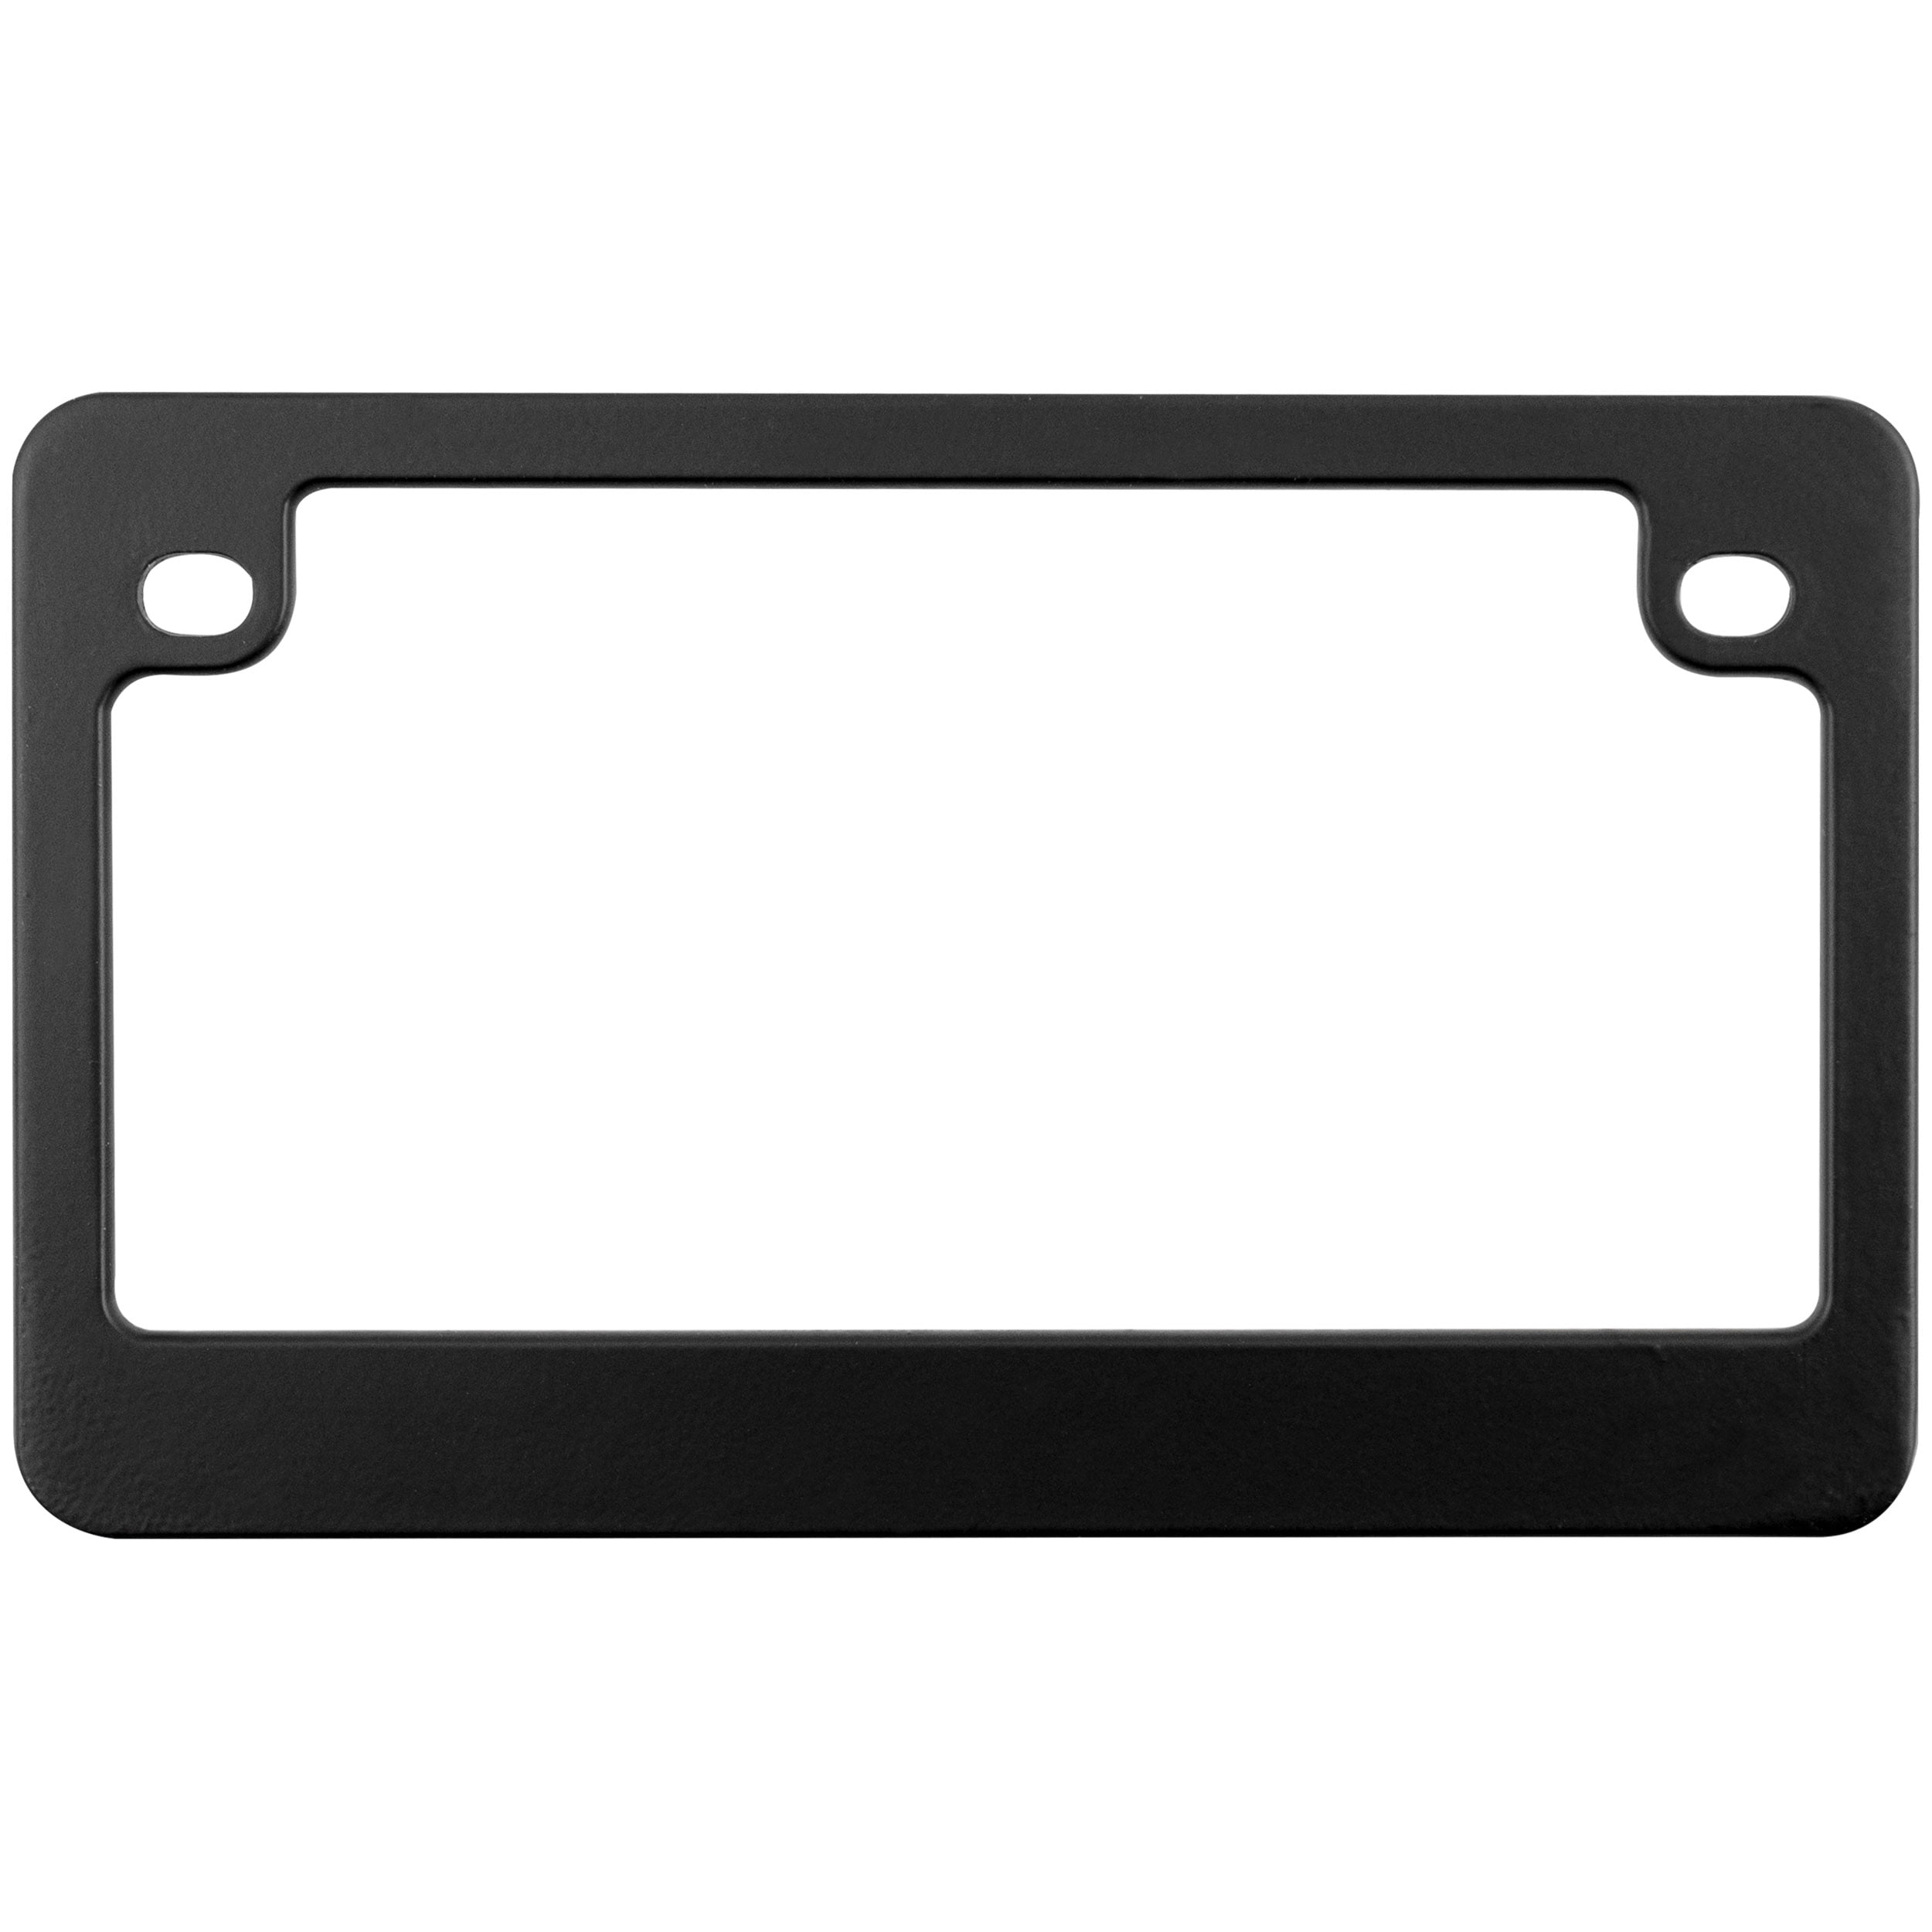 Product Express Id Rather BE Riding My Motorcycle License Plate Frame Car Accessories Gift 